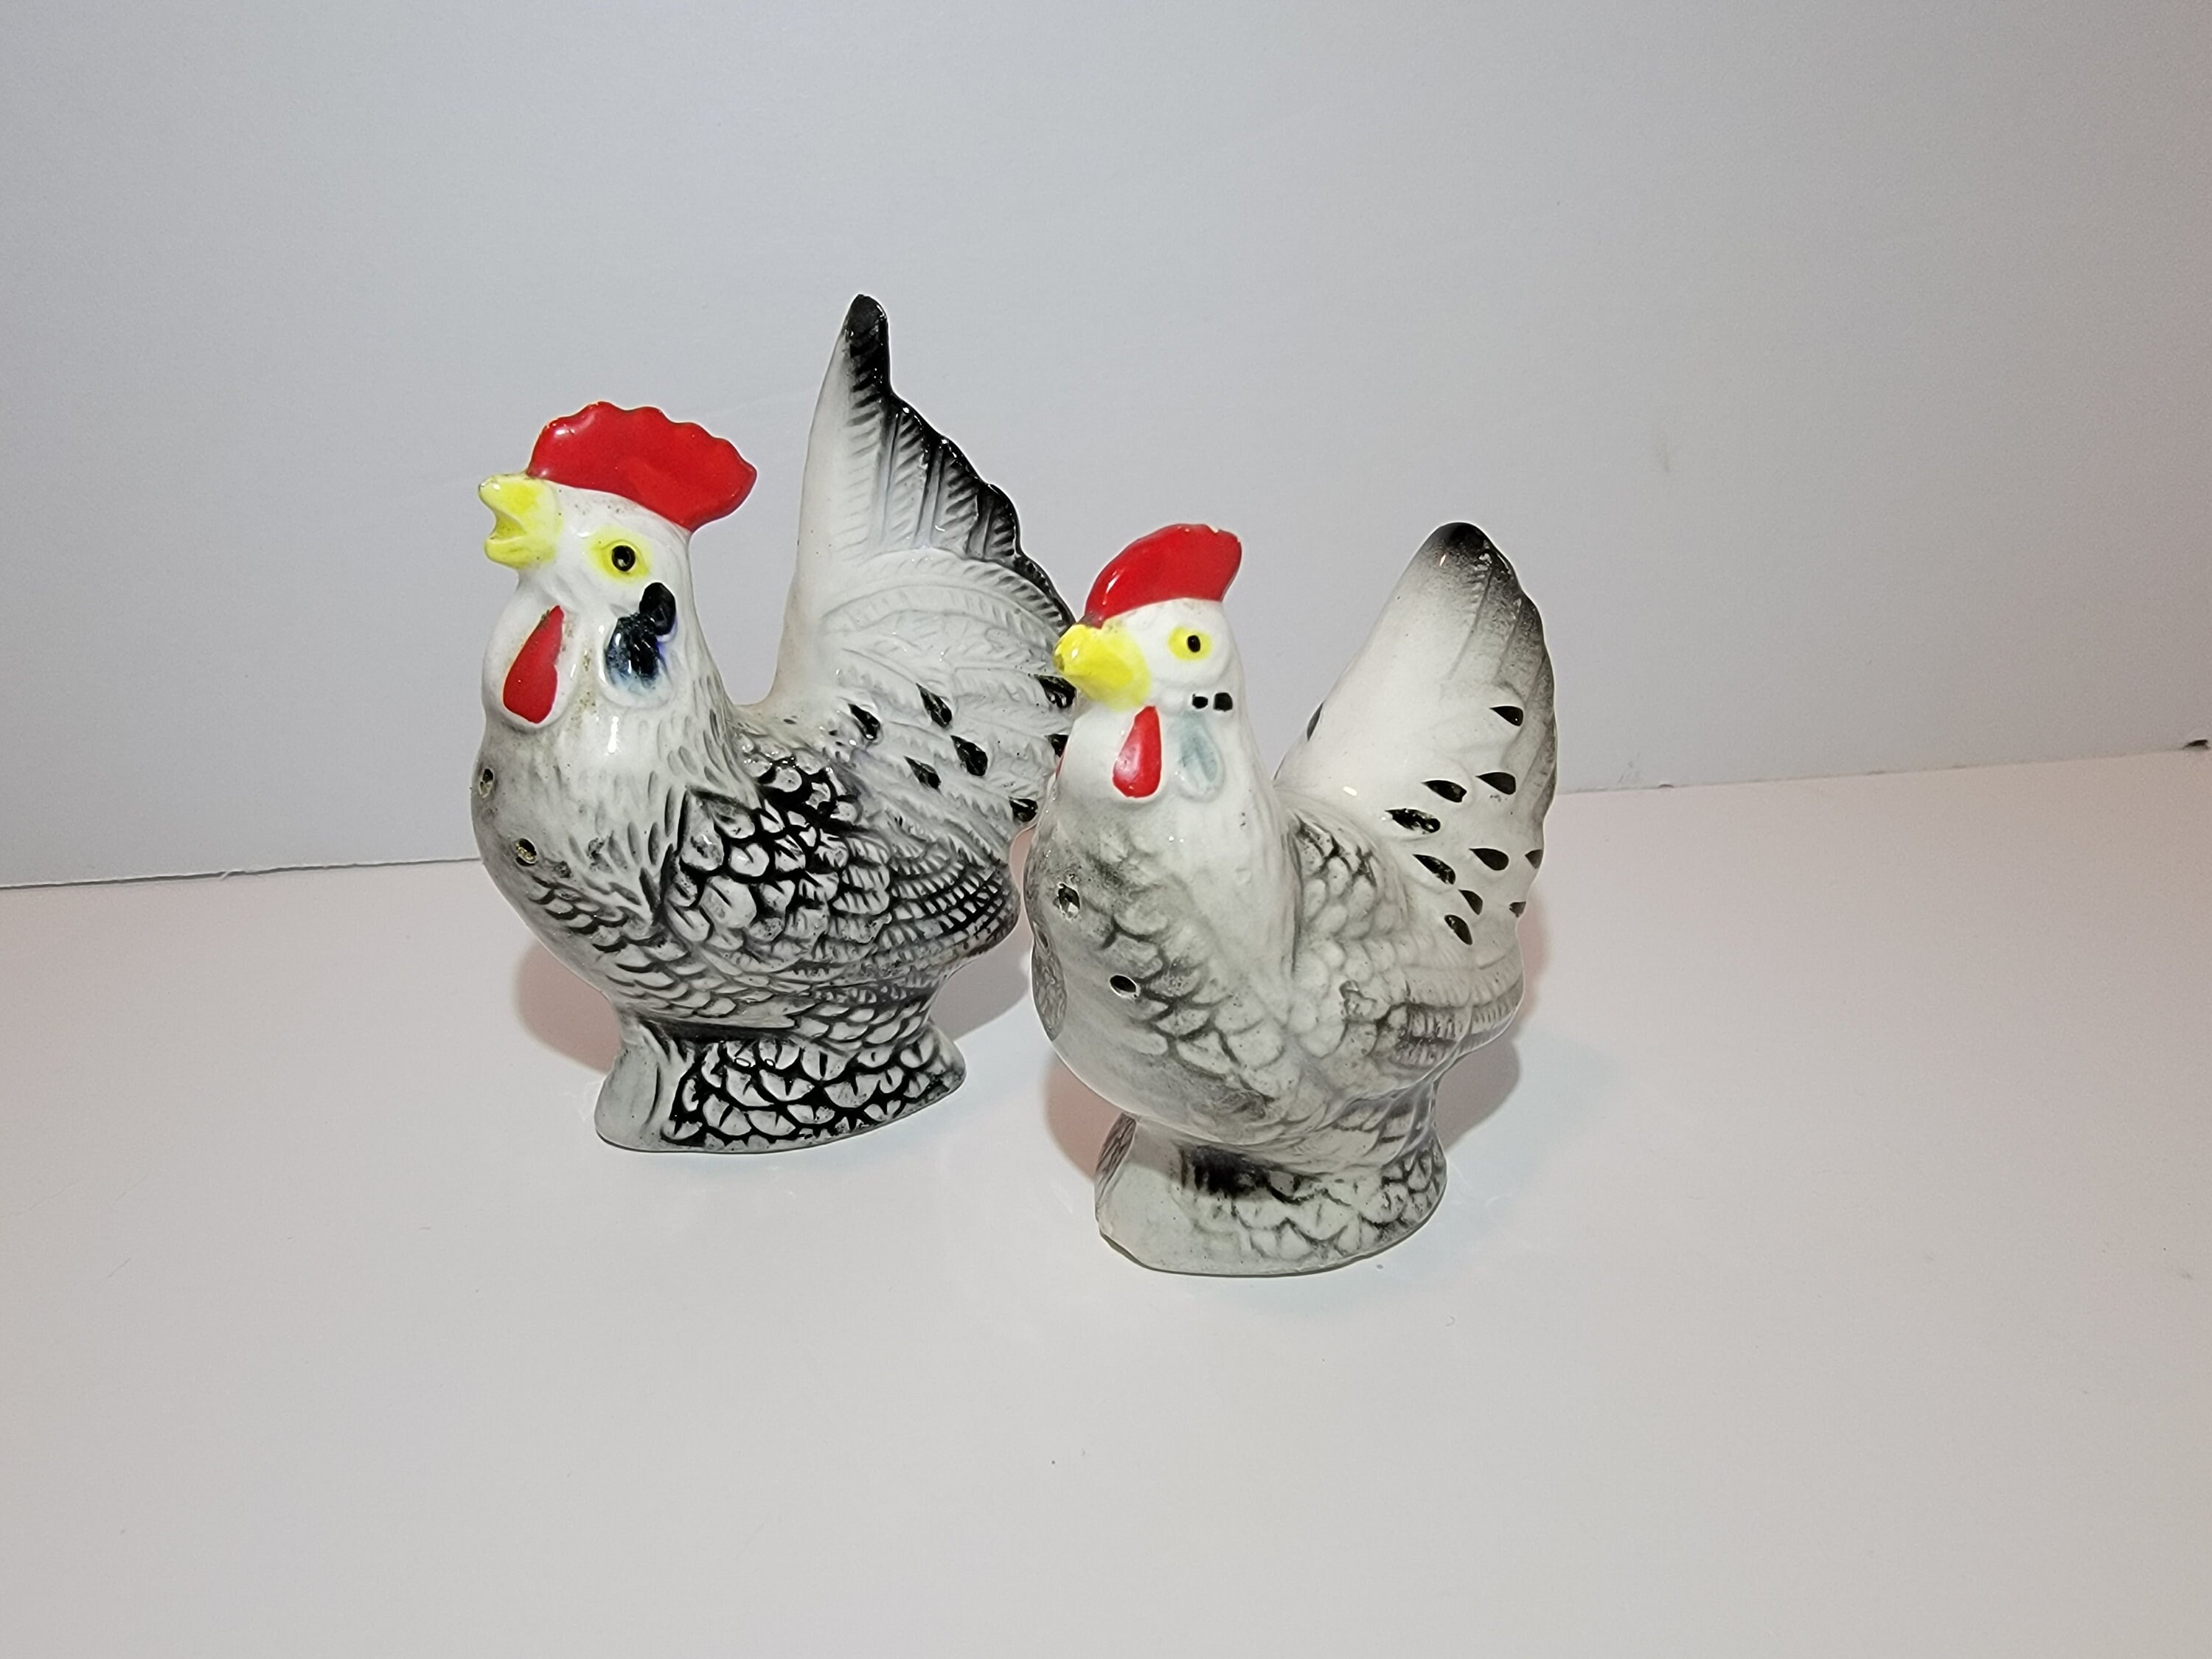 Vintage Hen and Rooster Salt and Pepper Shakers | Etsy